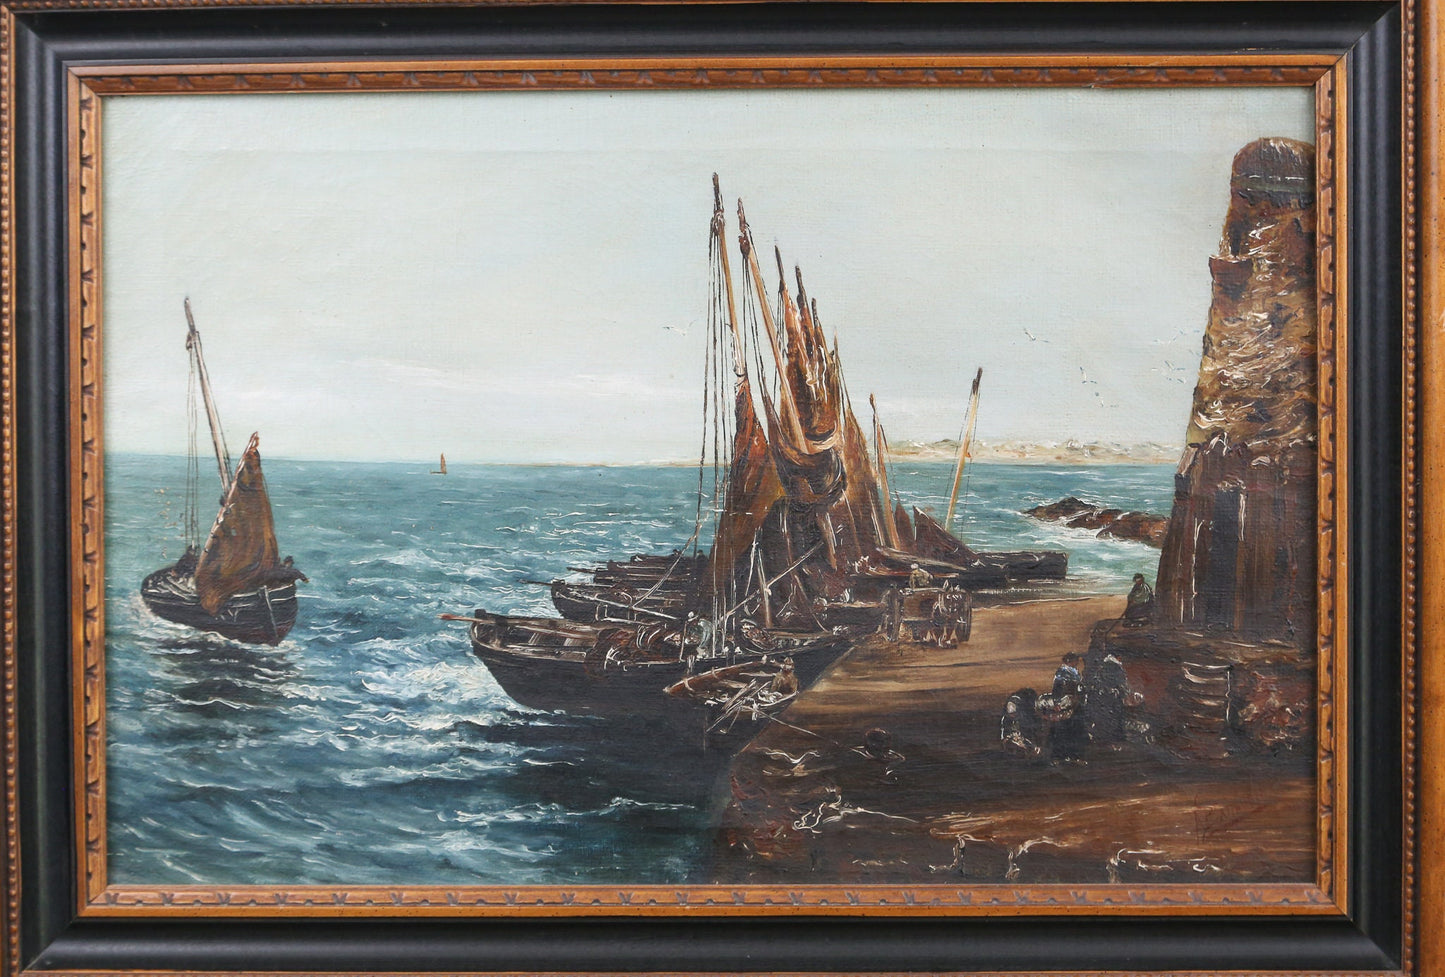 Painting Seascape Oil on Canvas Harbor Boats Signed A Bain 1911 Framed